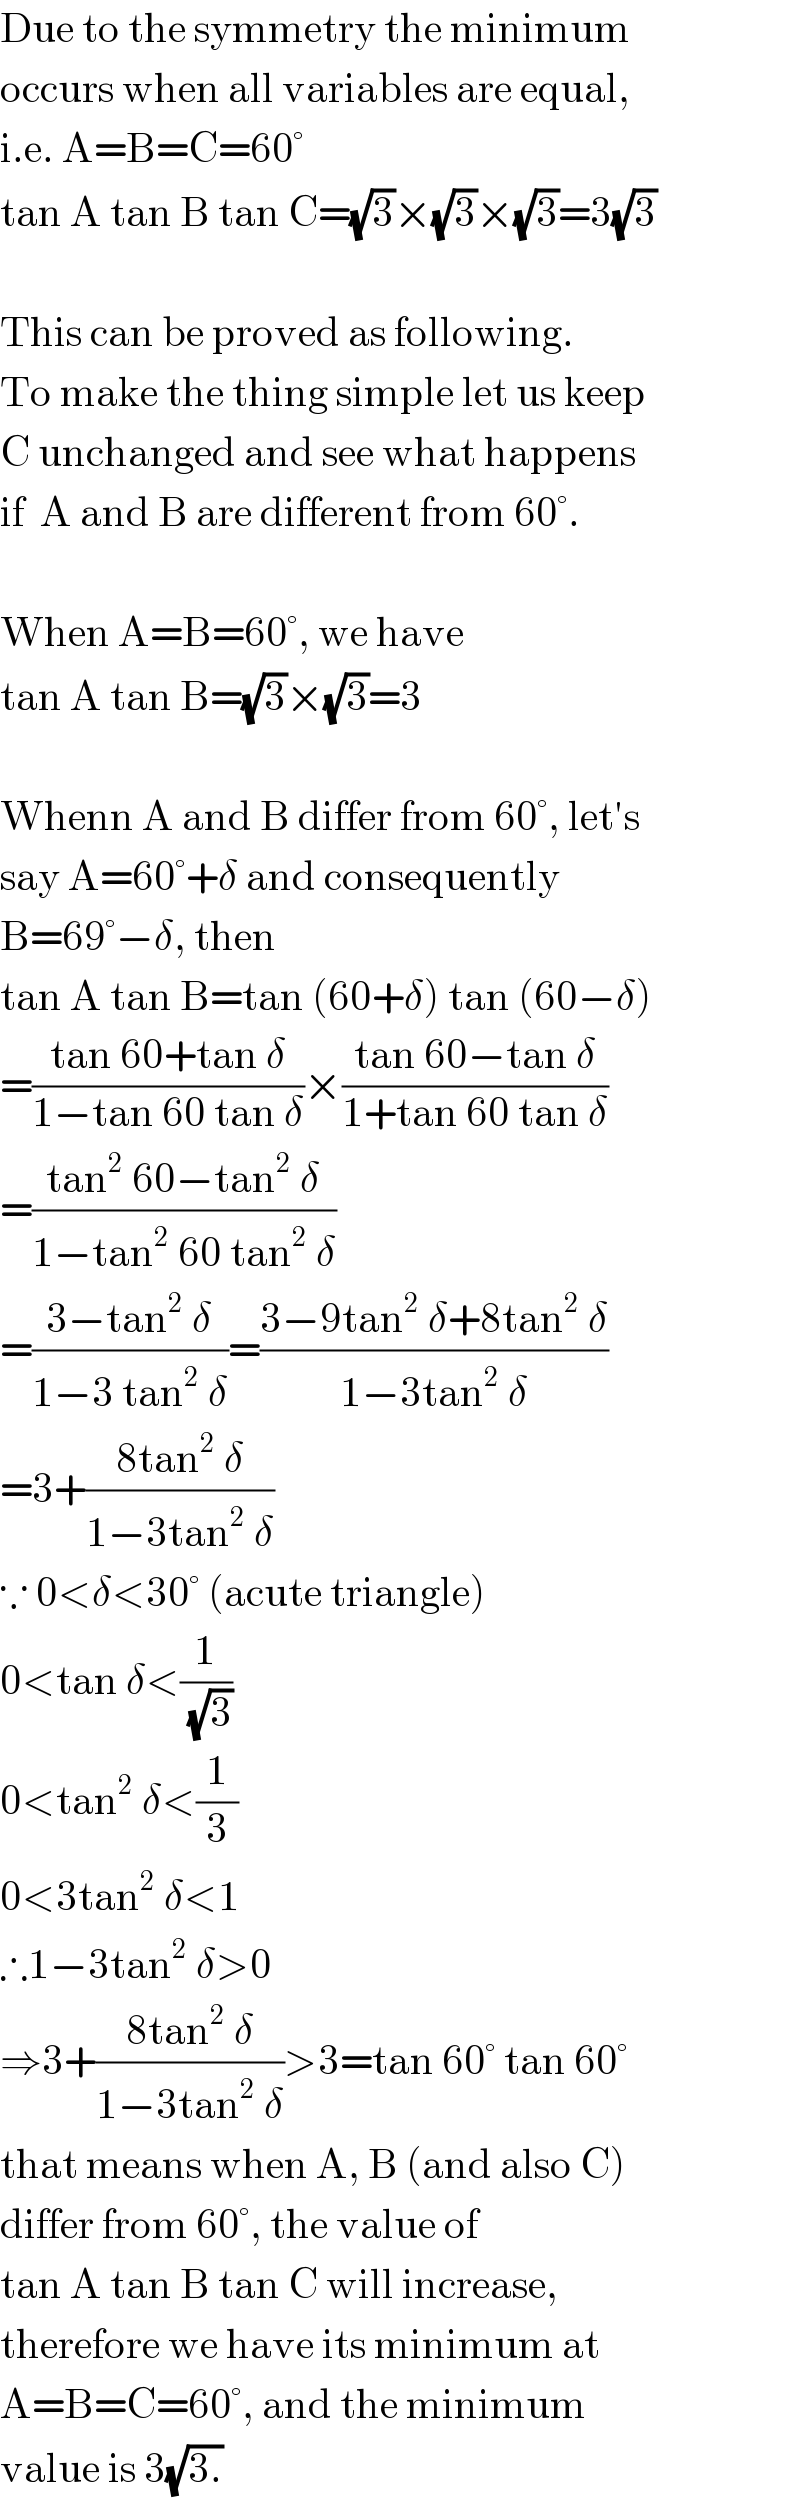 Due to the symmetry the minimum  occurs when all variables are equal,  i.e. A=B=C=60°  tan A tan B tan C=(√3)×(√3)×(√3)=3(√3)    This can be proved as following.  To make the thing simple let us keep  C unchanged and see what happens  if  A and B are different from 60°.    When A=B=60°, we have  tan A tan B=(√3)×(√3)=3    Whenn A and B differ from 60°, let′s  say A=60°+δ and consequently   B=69°−δ, then  tan A tan B=tan (60+δ) tan (60−δ)  =((tan 60+tan δ)/(1−tan 60 tan δ))×((tan 60−tan δ)/(1+tan 60 tan δ))  =((tan^2  60−tan^2  δ)/(1−tan^2  60 tan^2  δ))  =((3−tan^2  δ)/(1−3 tan^2  δ))=((3−9tan^2  δ+8tan^2  δ)/(1−3tan^2  δ))  =3+((8tan^2  δ)/(1−3tan^2  δ))  ∵ 0<δ<30° (acute triangle)  0<tan δ<(1/(√3))  0<tan^2  δ<(1/3)  0<3tan^2  δ<1  ∴1−3tan^2  δ>0  ⇒3+((8tan^2  δ)/(1−3tan^2  δ))>3=tan 60° tan 60°  that means when A, B (and also C)  differ from 60°, the value of  tan A tan B tan C will increase,  therefore we have its minimum at  A=B=C=60°, and the minimum  value is 3(√(3.))  